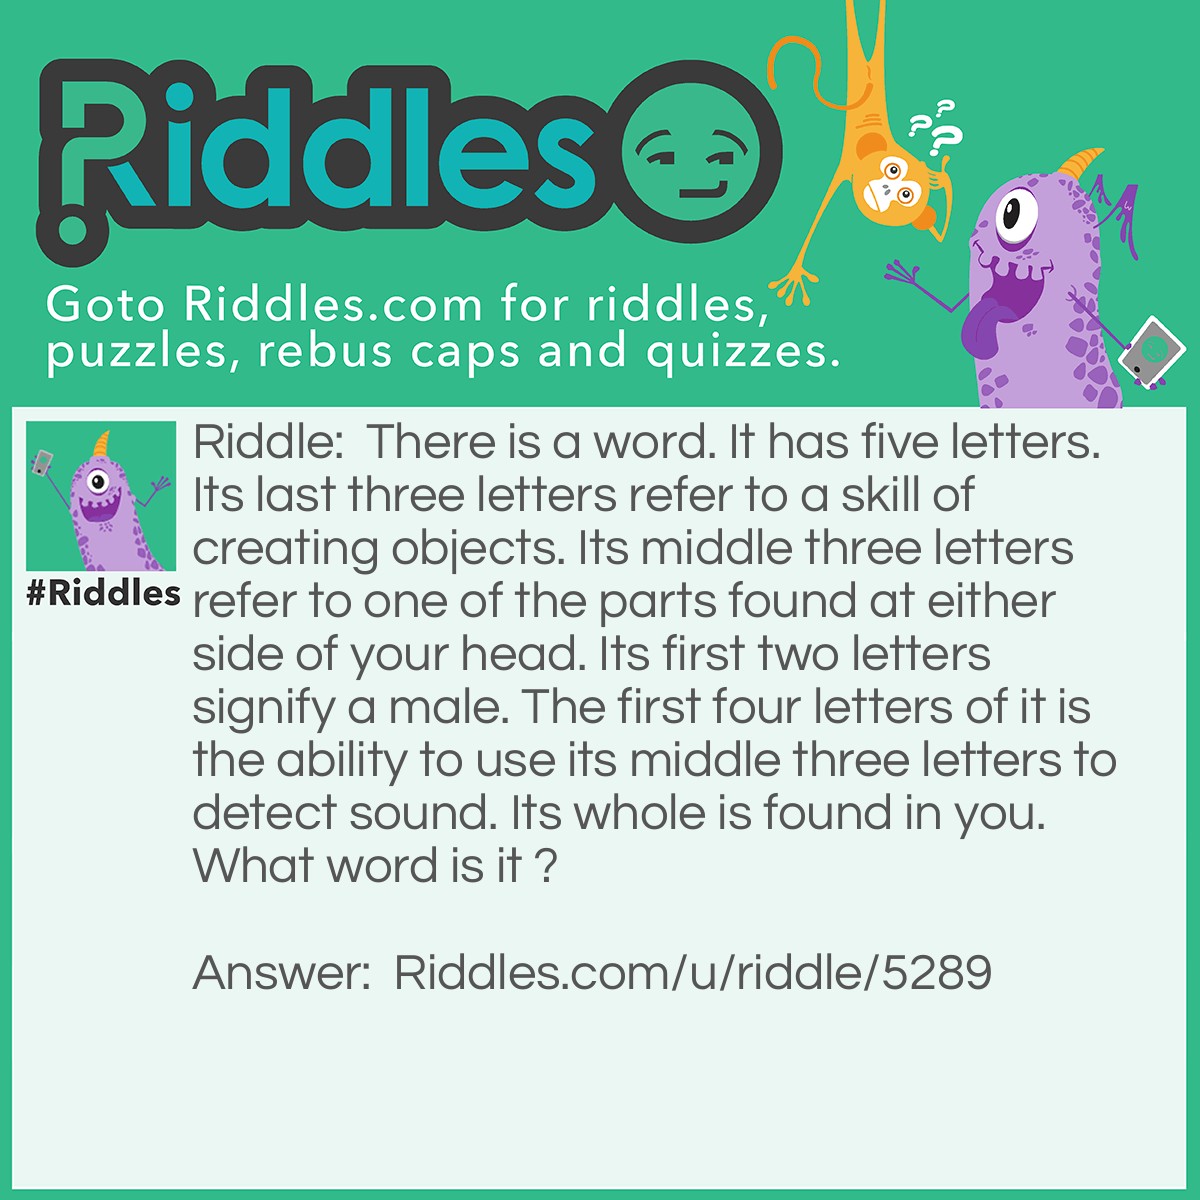 Riddle: There is a word. It has five letters. Its last three letters refer to a skill of creating objects. Its middle three letters refer to one of the parts found at either side of your head. Its first two letters signify a male. The first four letters of it is the ability to use its middle three letters to detect sound. Its whole is found in you. What word is it ? Answer: Heart.